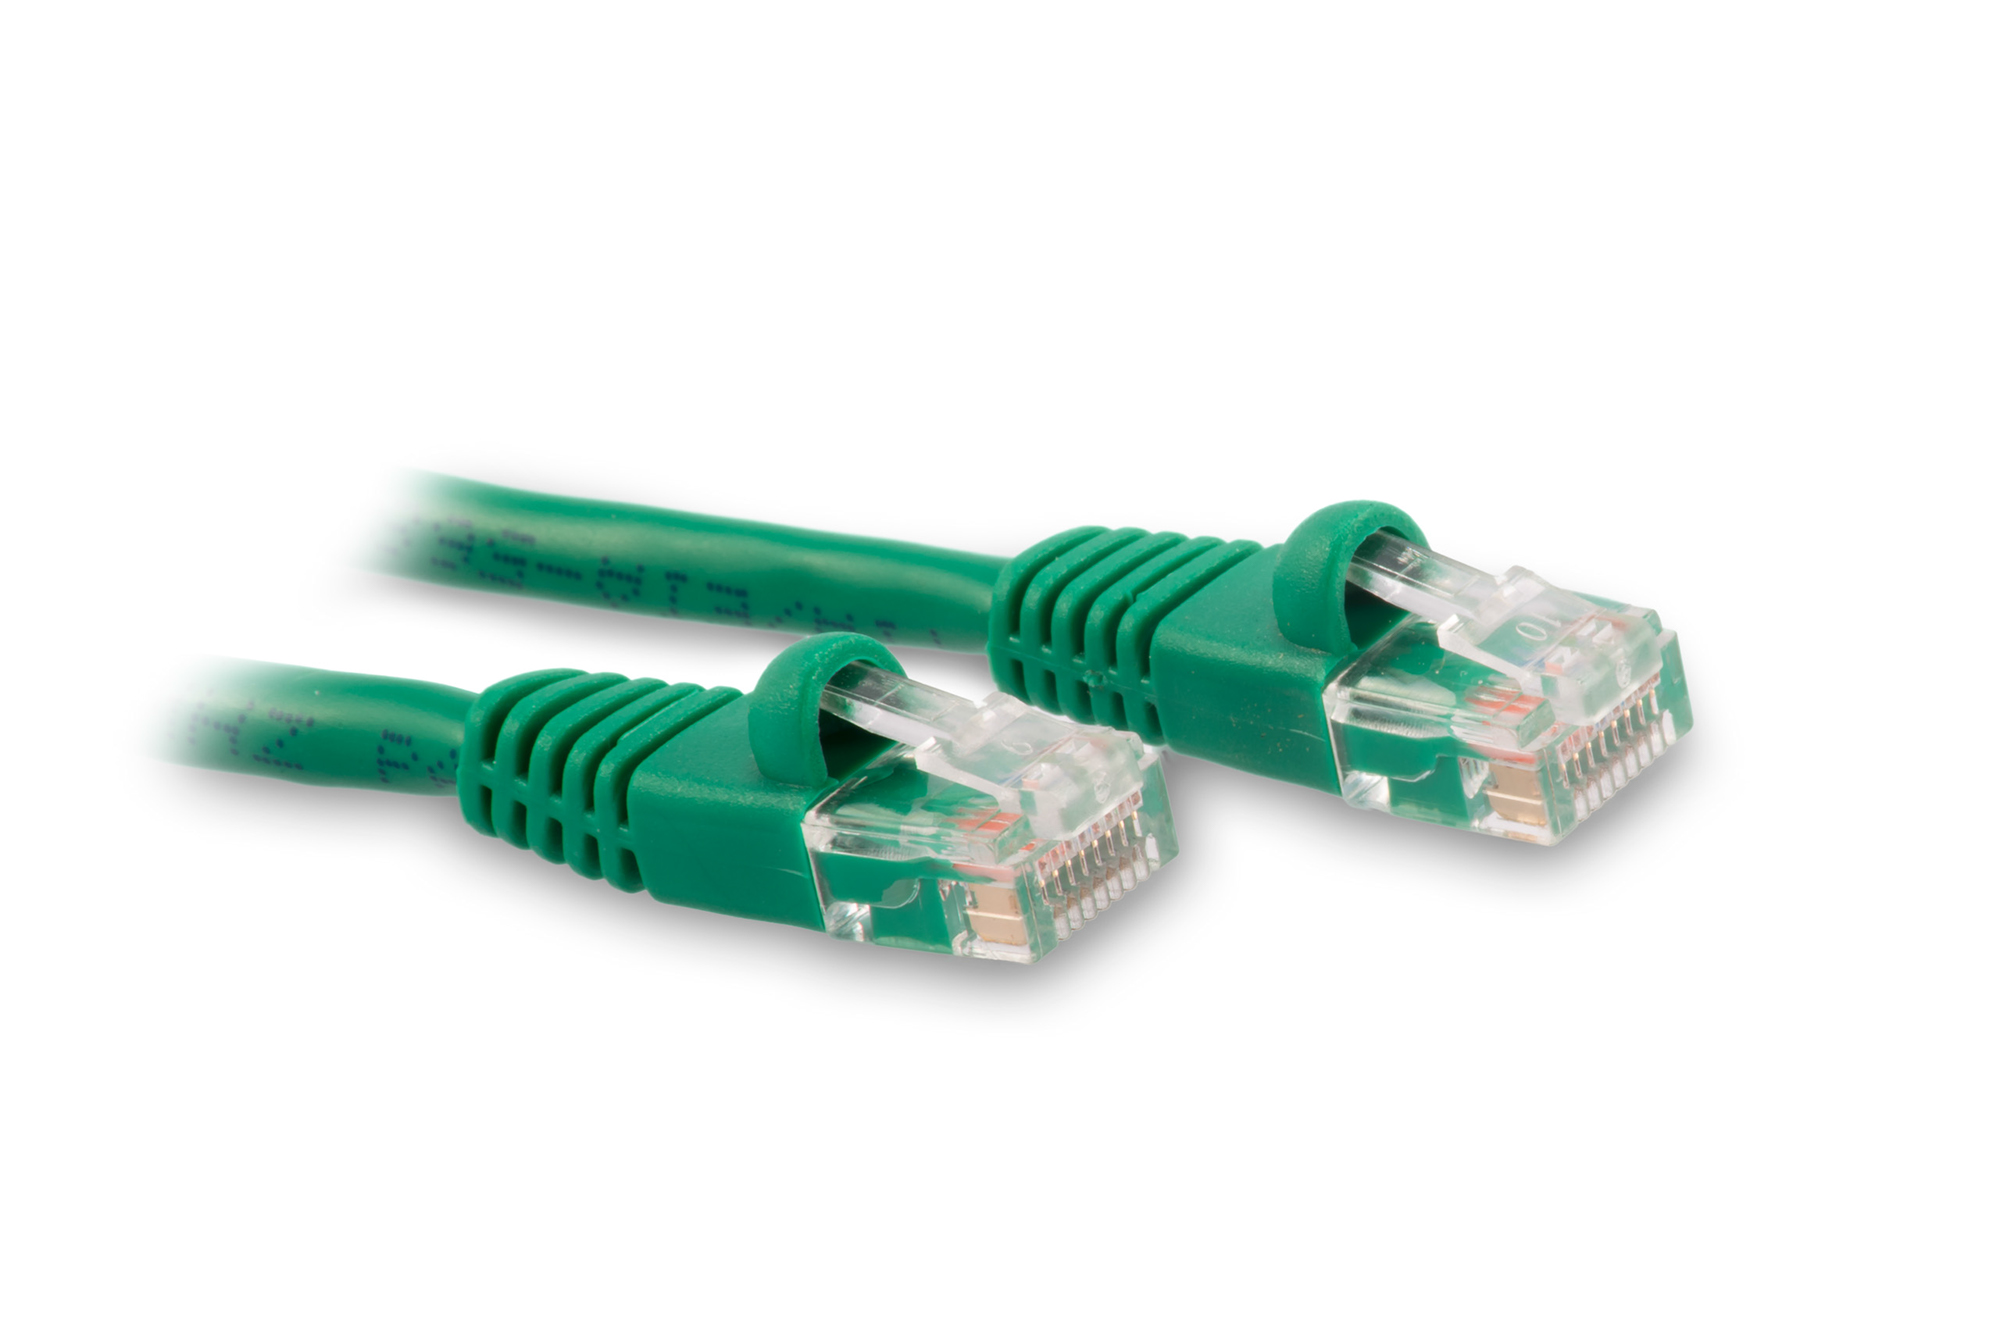 3ft Cat5e Ethernet Patch Cable - Green Color - Snagless Boot